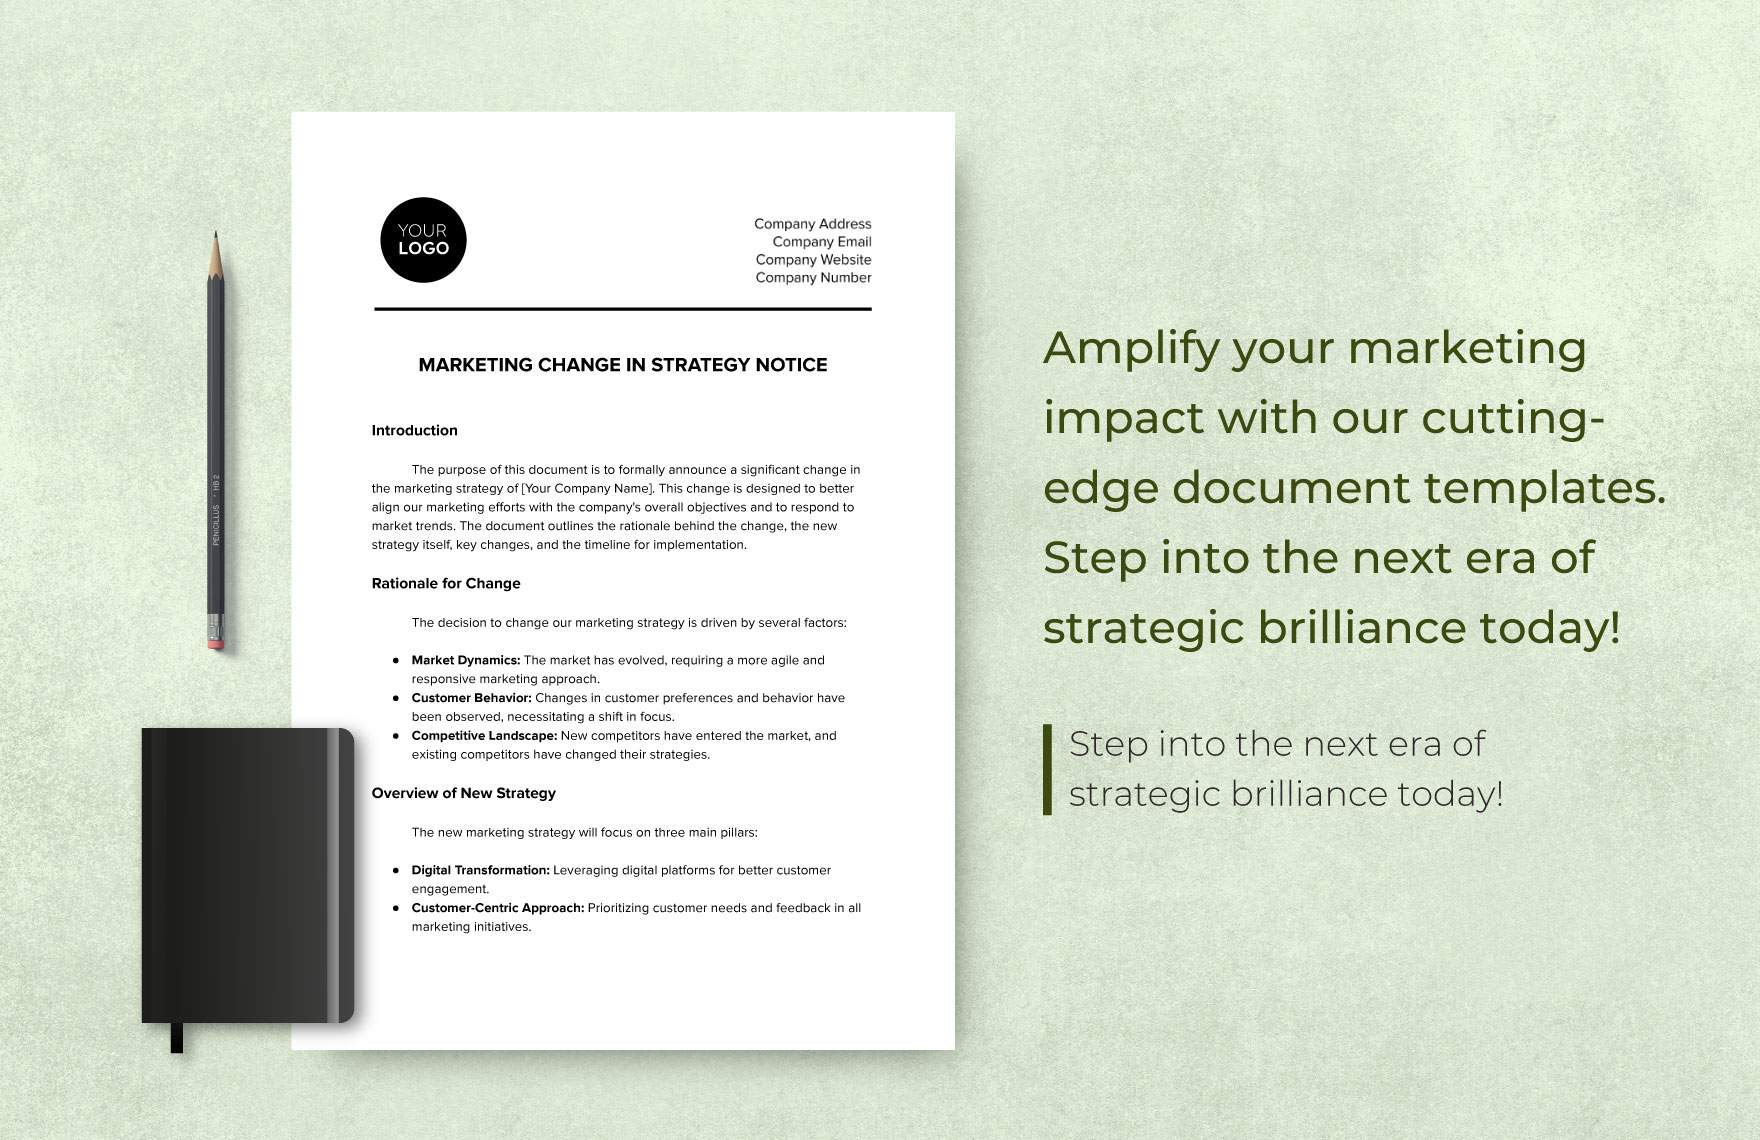 Marketing Change in Strategy Notice Template